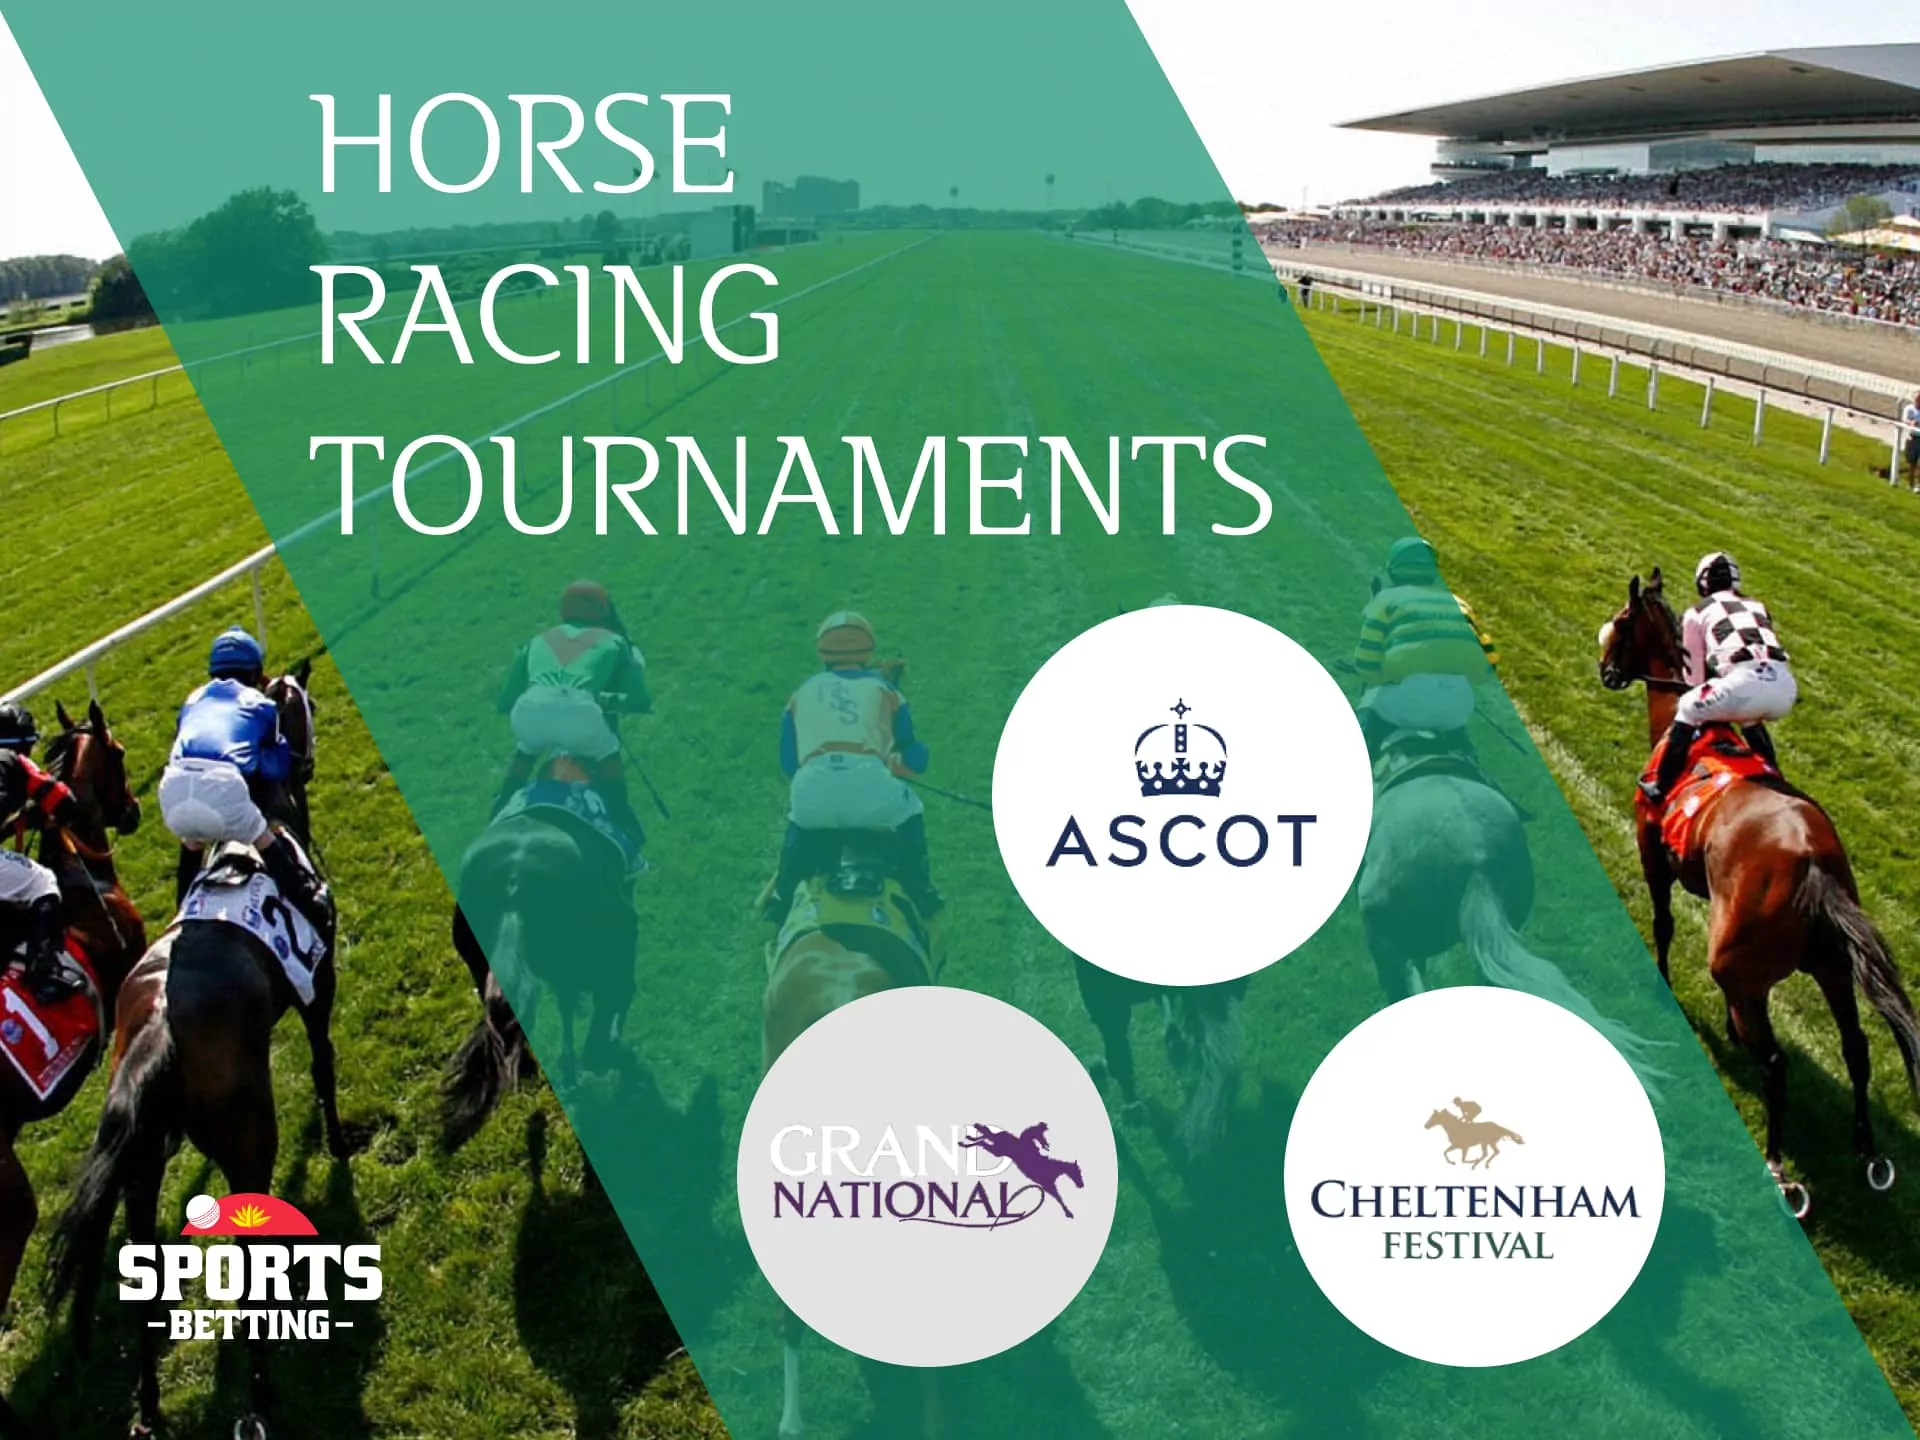 There are regular horse racing tournaments.